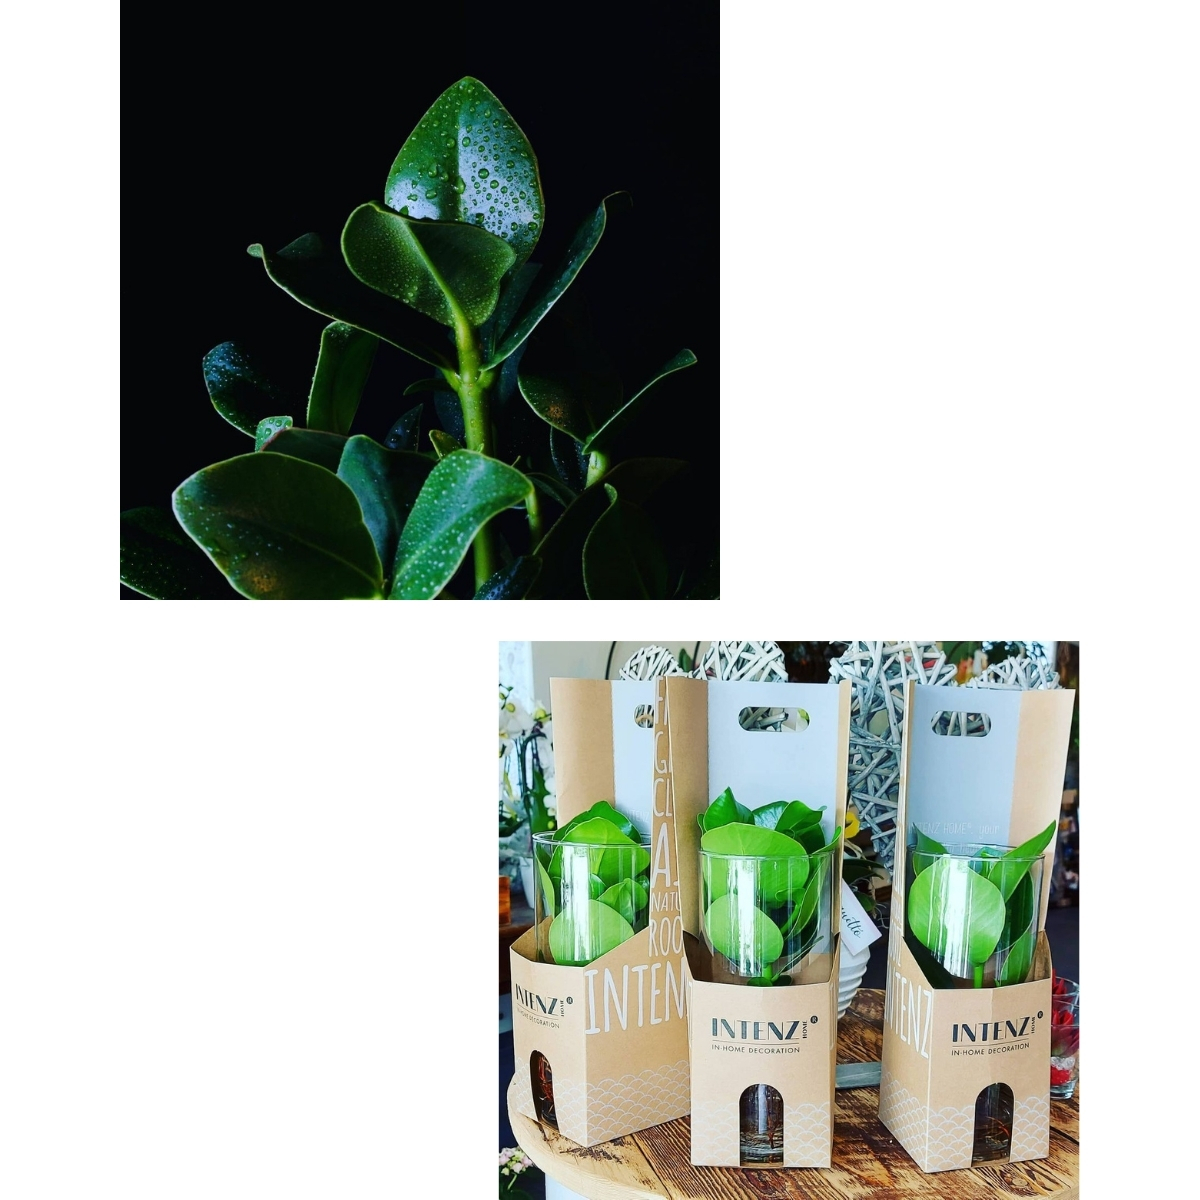 Clusia is the Perfect Hydroponic Houseplant Intenz